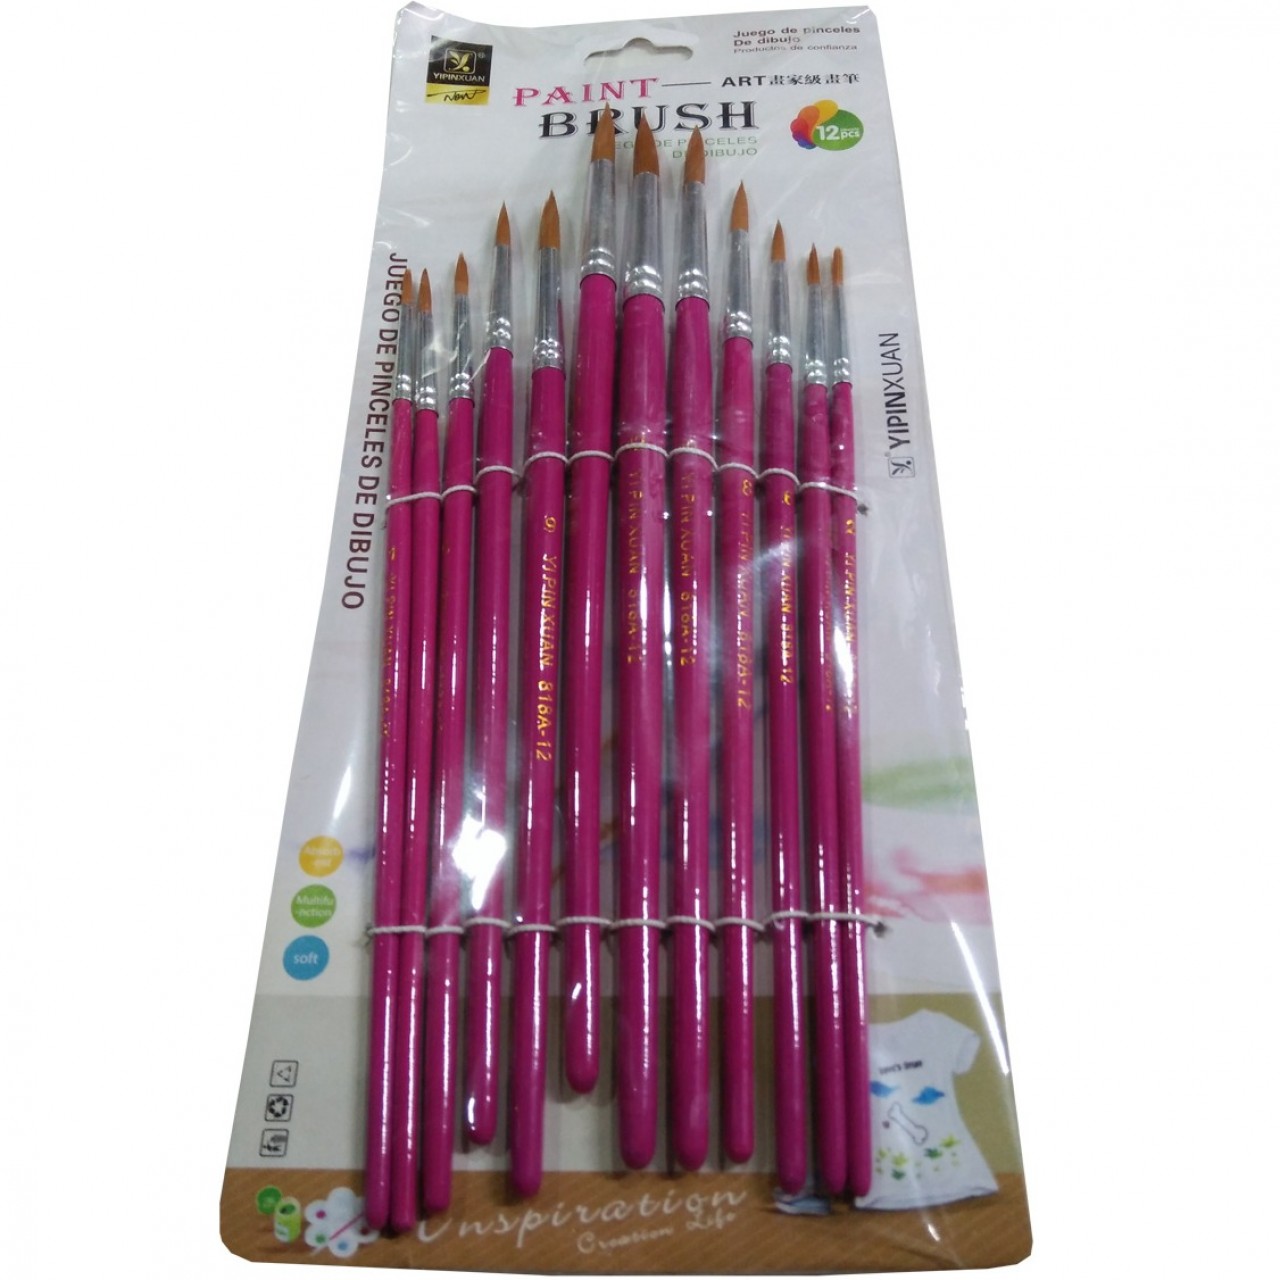 Paint Brushes - 12 Pieces - Shocking Pink